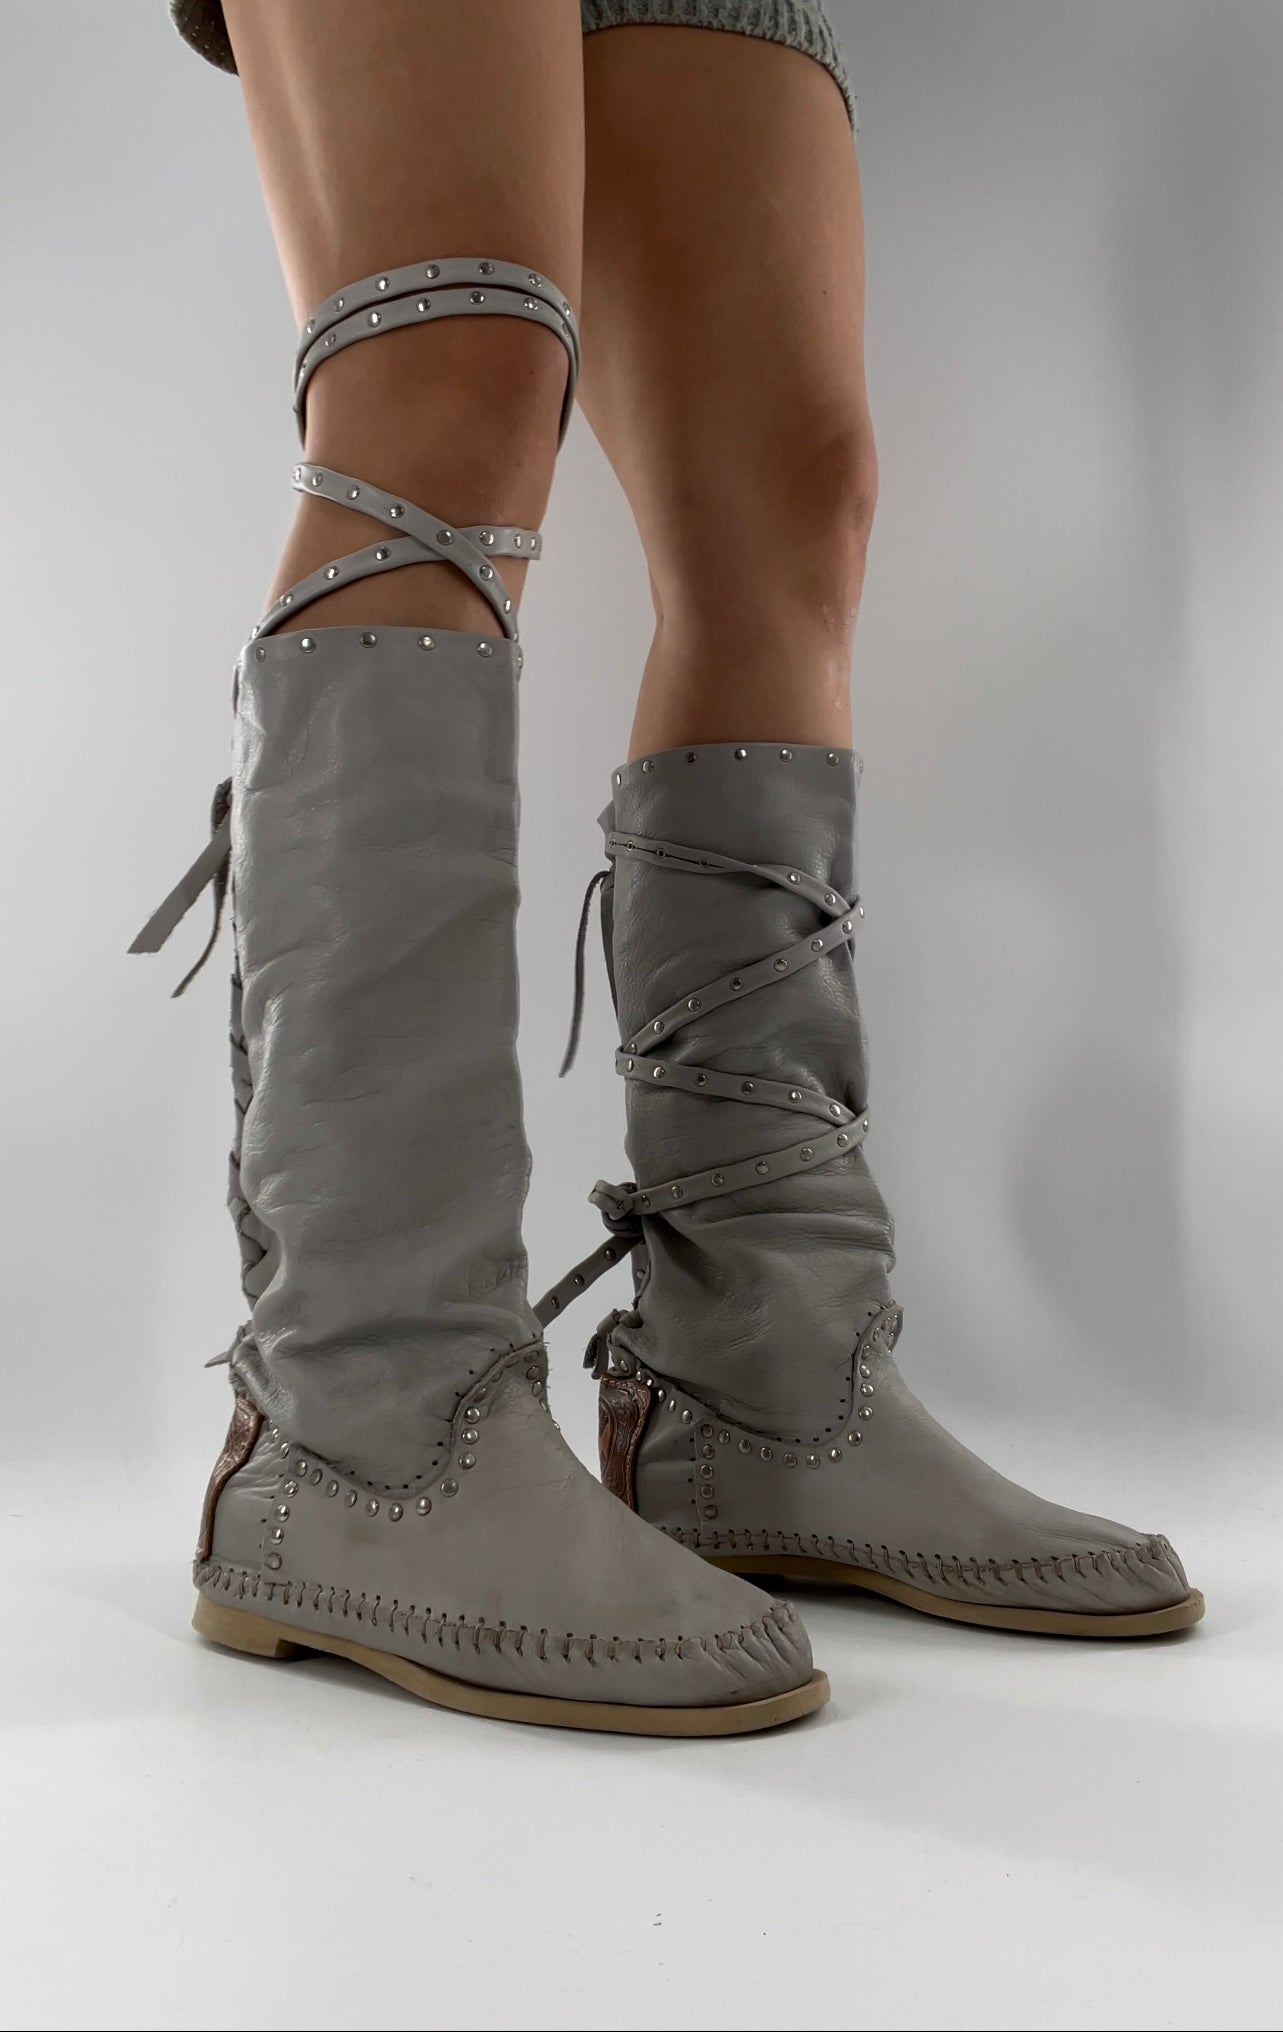 Hector Riccione Off White Leather Boots With Silver Studs Embellishments and Tied Up  -  Size 8 Apparently- Gently Used -